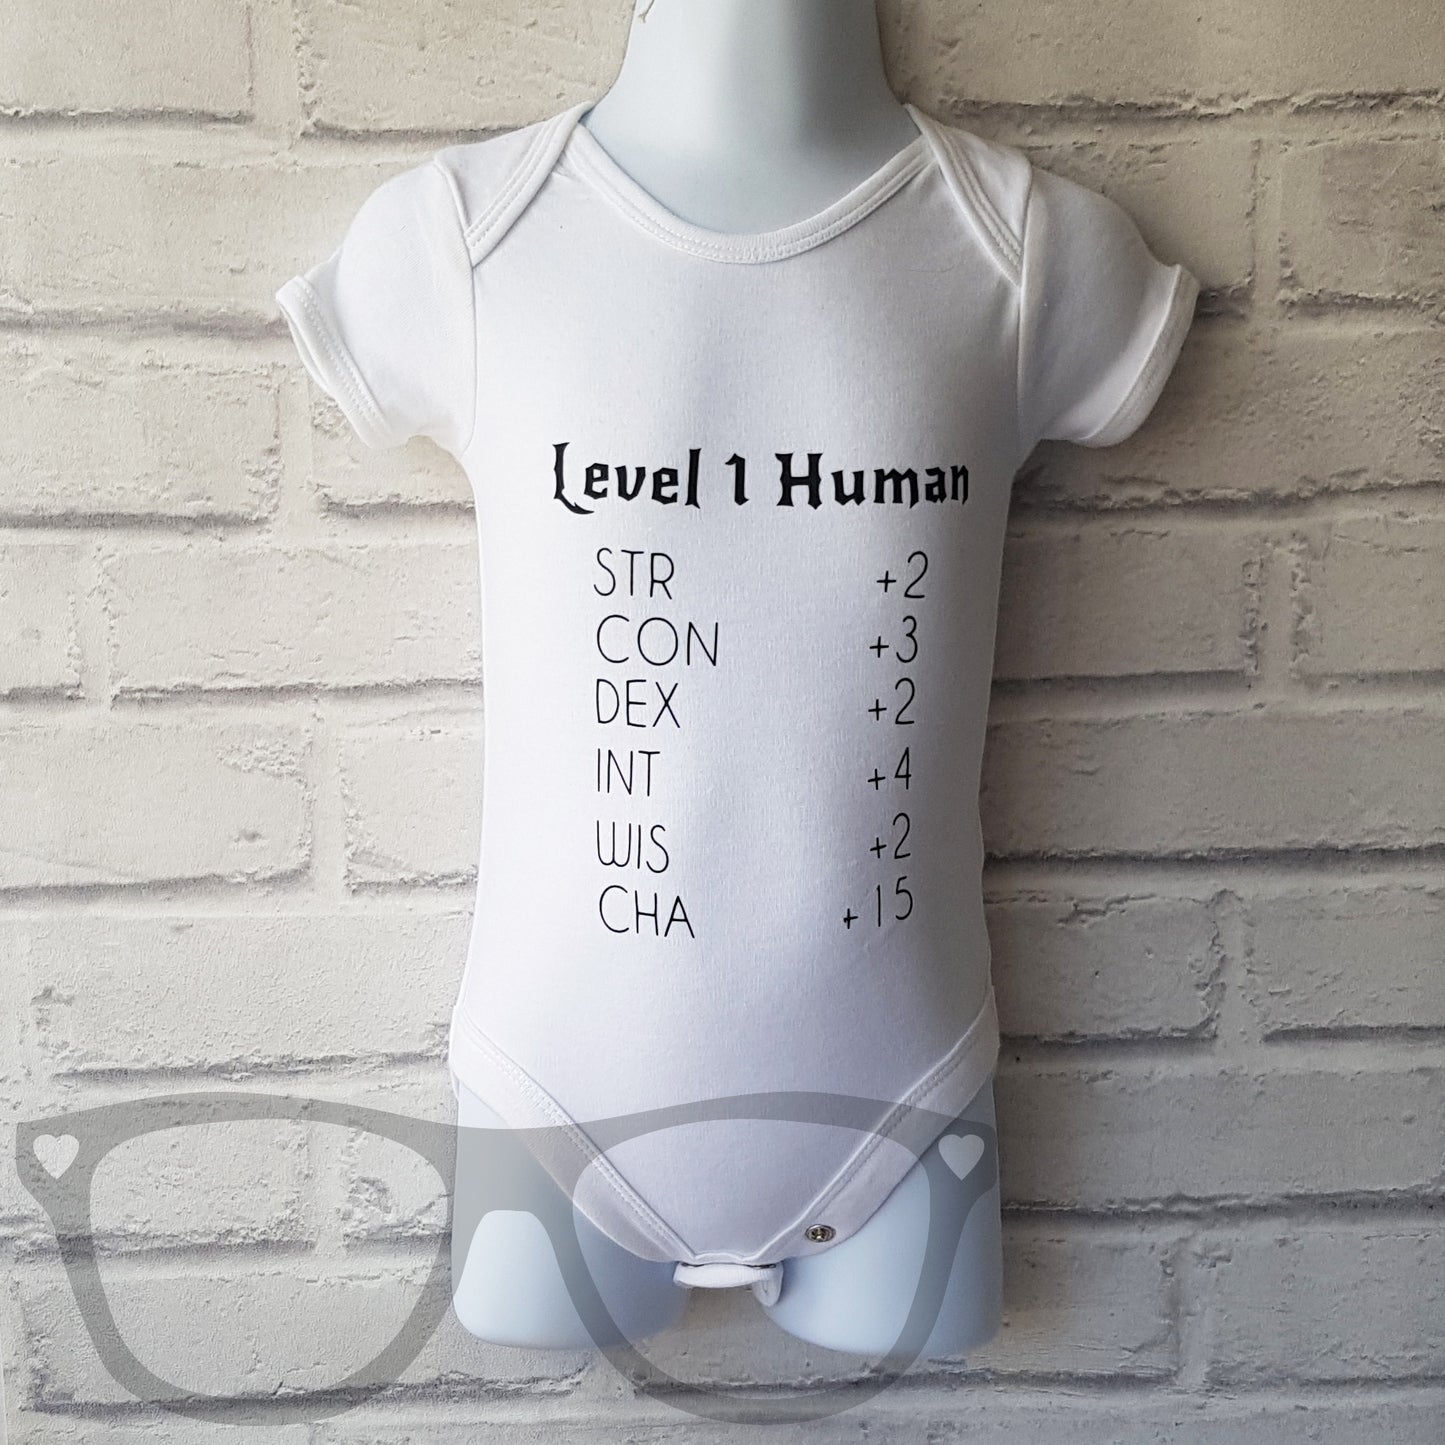 Level 1 human baby body suit. White organic cotton baby suit with popper detail. Heat pressed black vinyl design on the front that shows Level 1 and appropriate stats for a baby. Great gift idea for new geeky parents who love to play dungeons and dragons